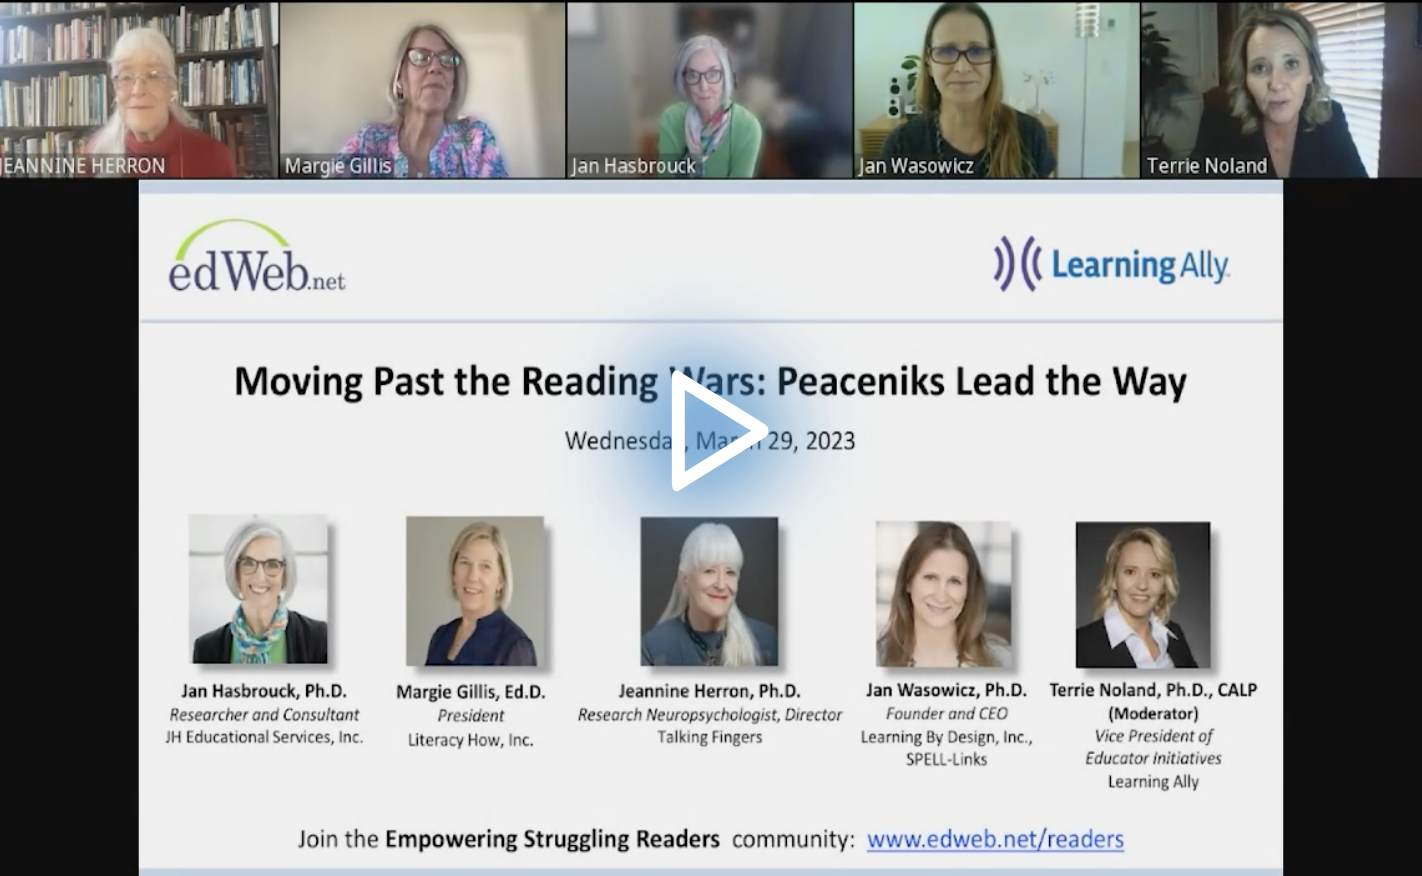 Moving Past the Reading Wars: Peaceniks Lead the Way edLeader Panel recording screenshot